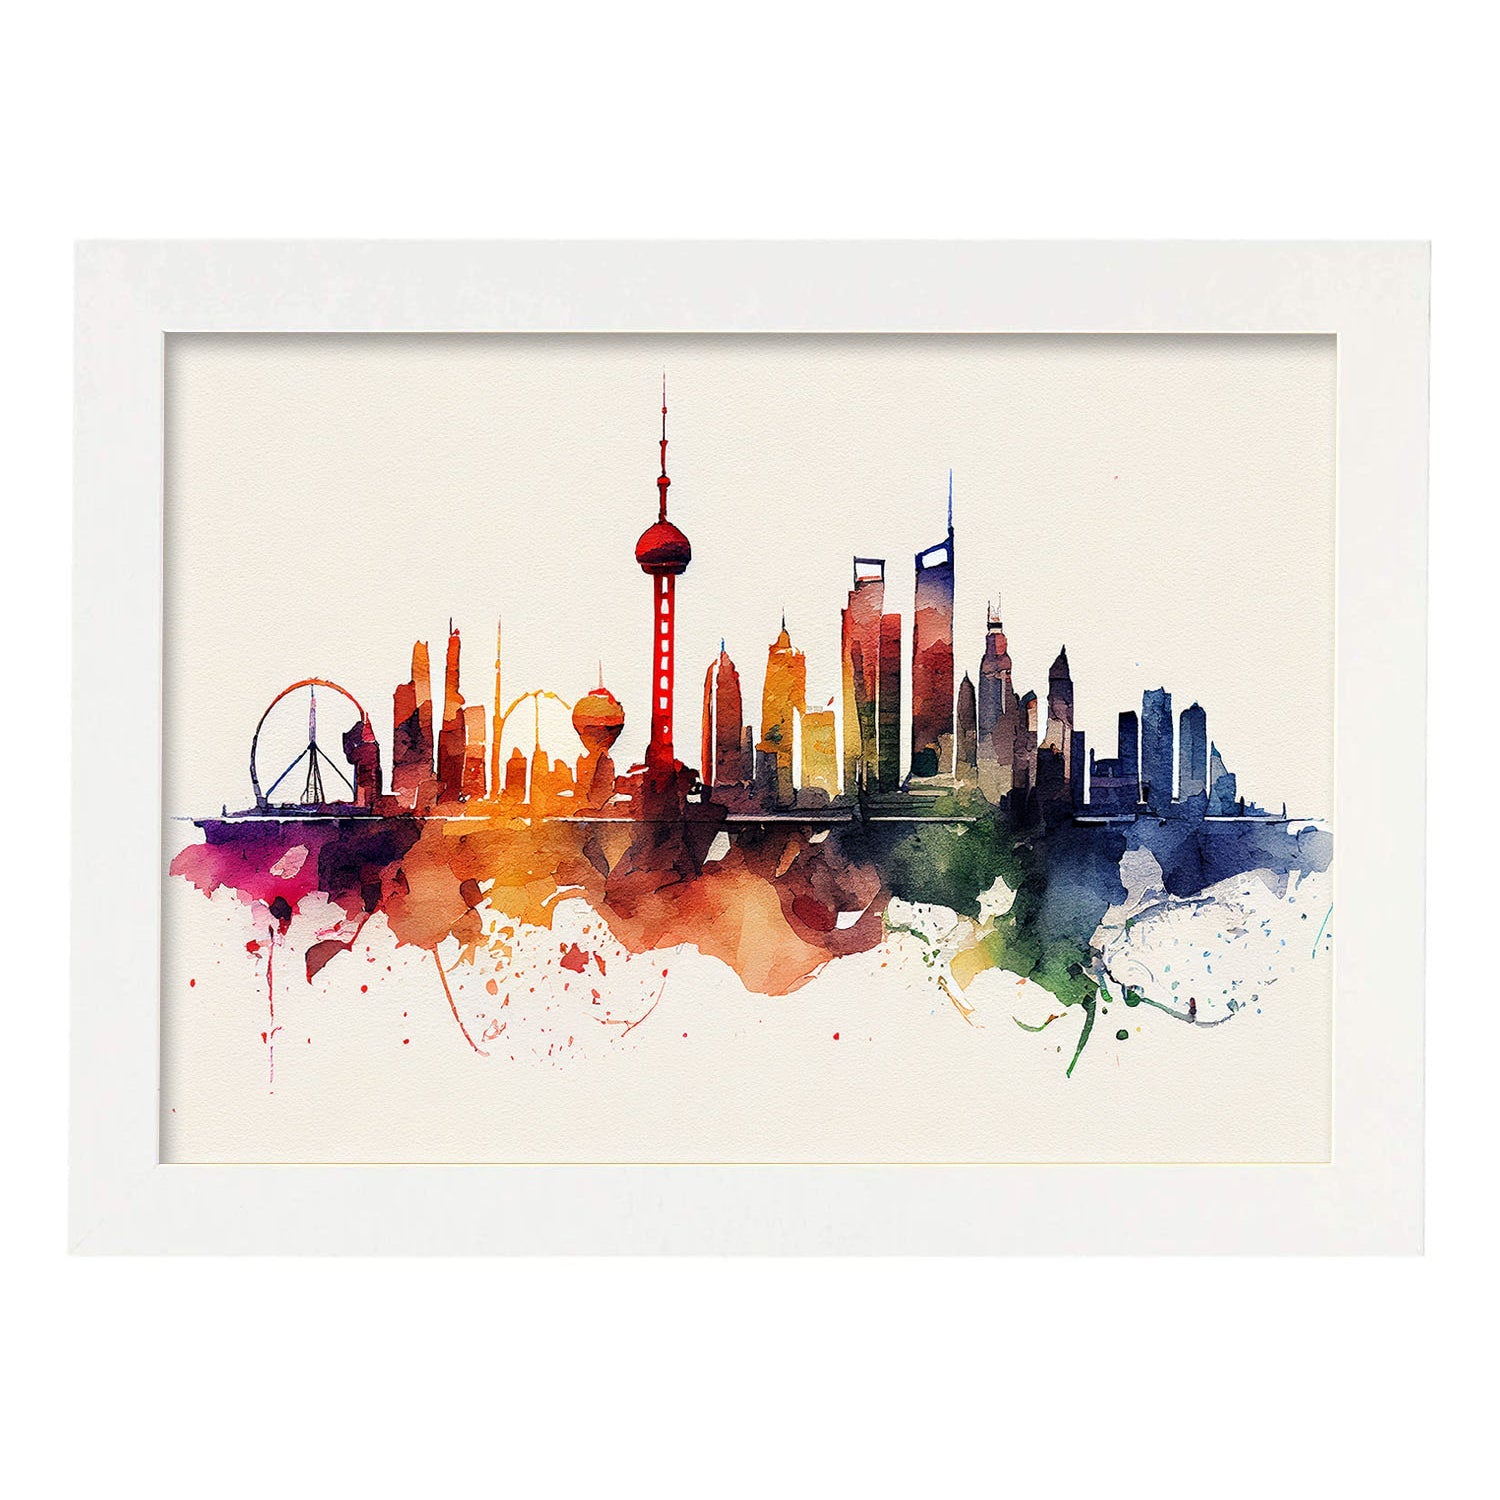 Nacnic watercolor of a skyline of the city of Shanghai_2. Aesthetic Wall Art Prints for Bedroom or Living Room Design.-Artwork-Nacnic-A4-Marco Blanco-Nacnic Estudio SL